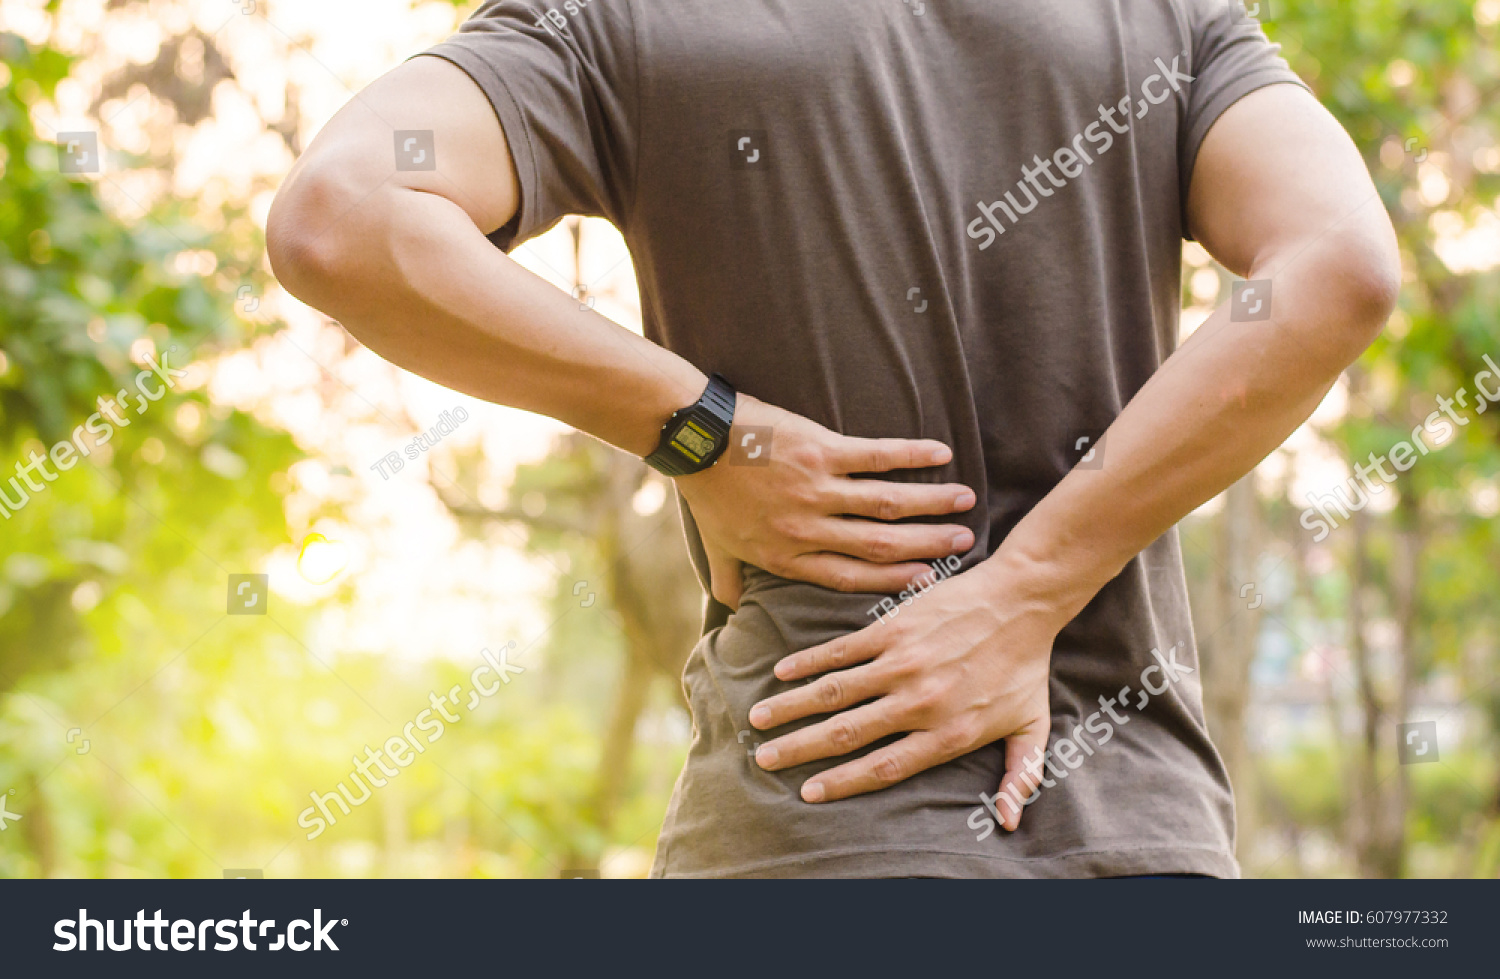 Sport injury, Man with back pain #607977332